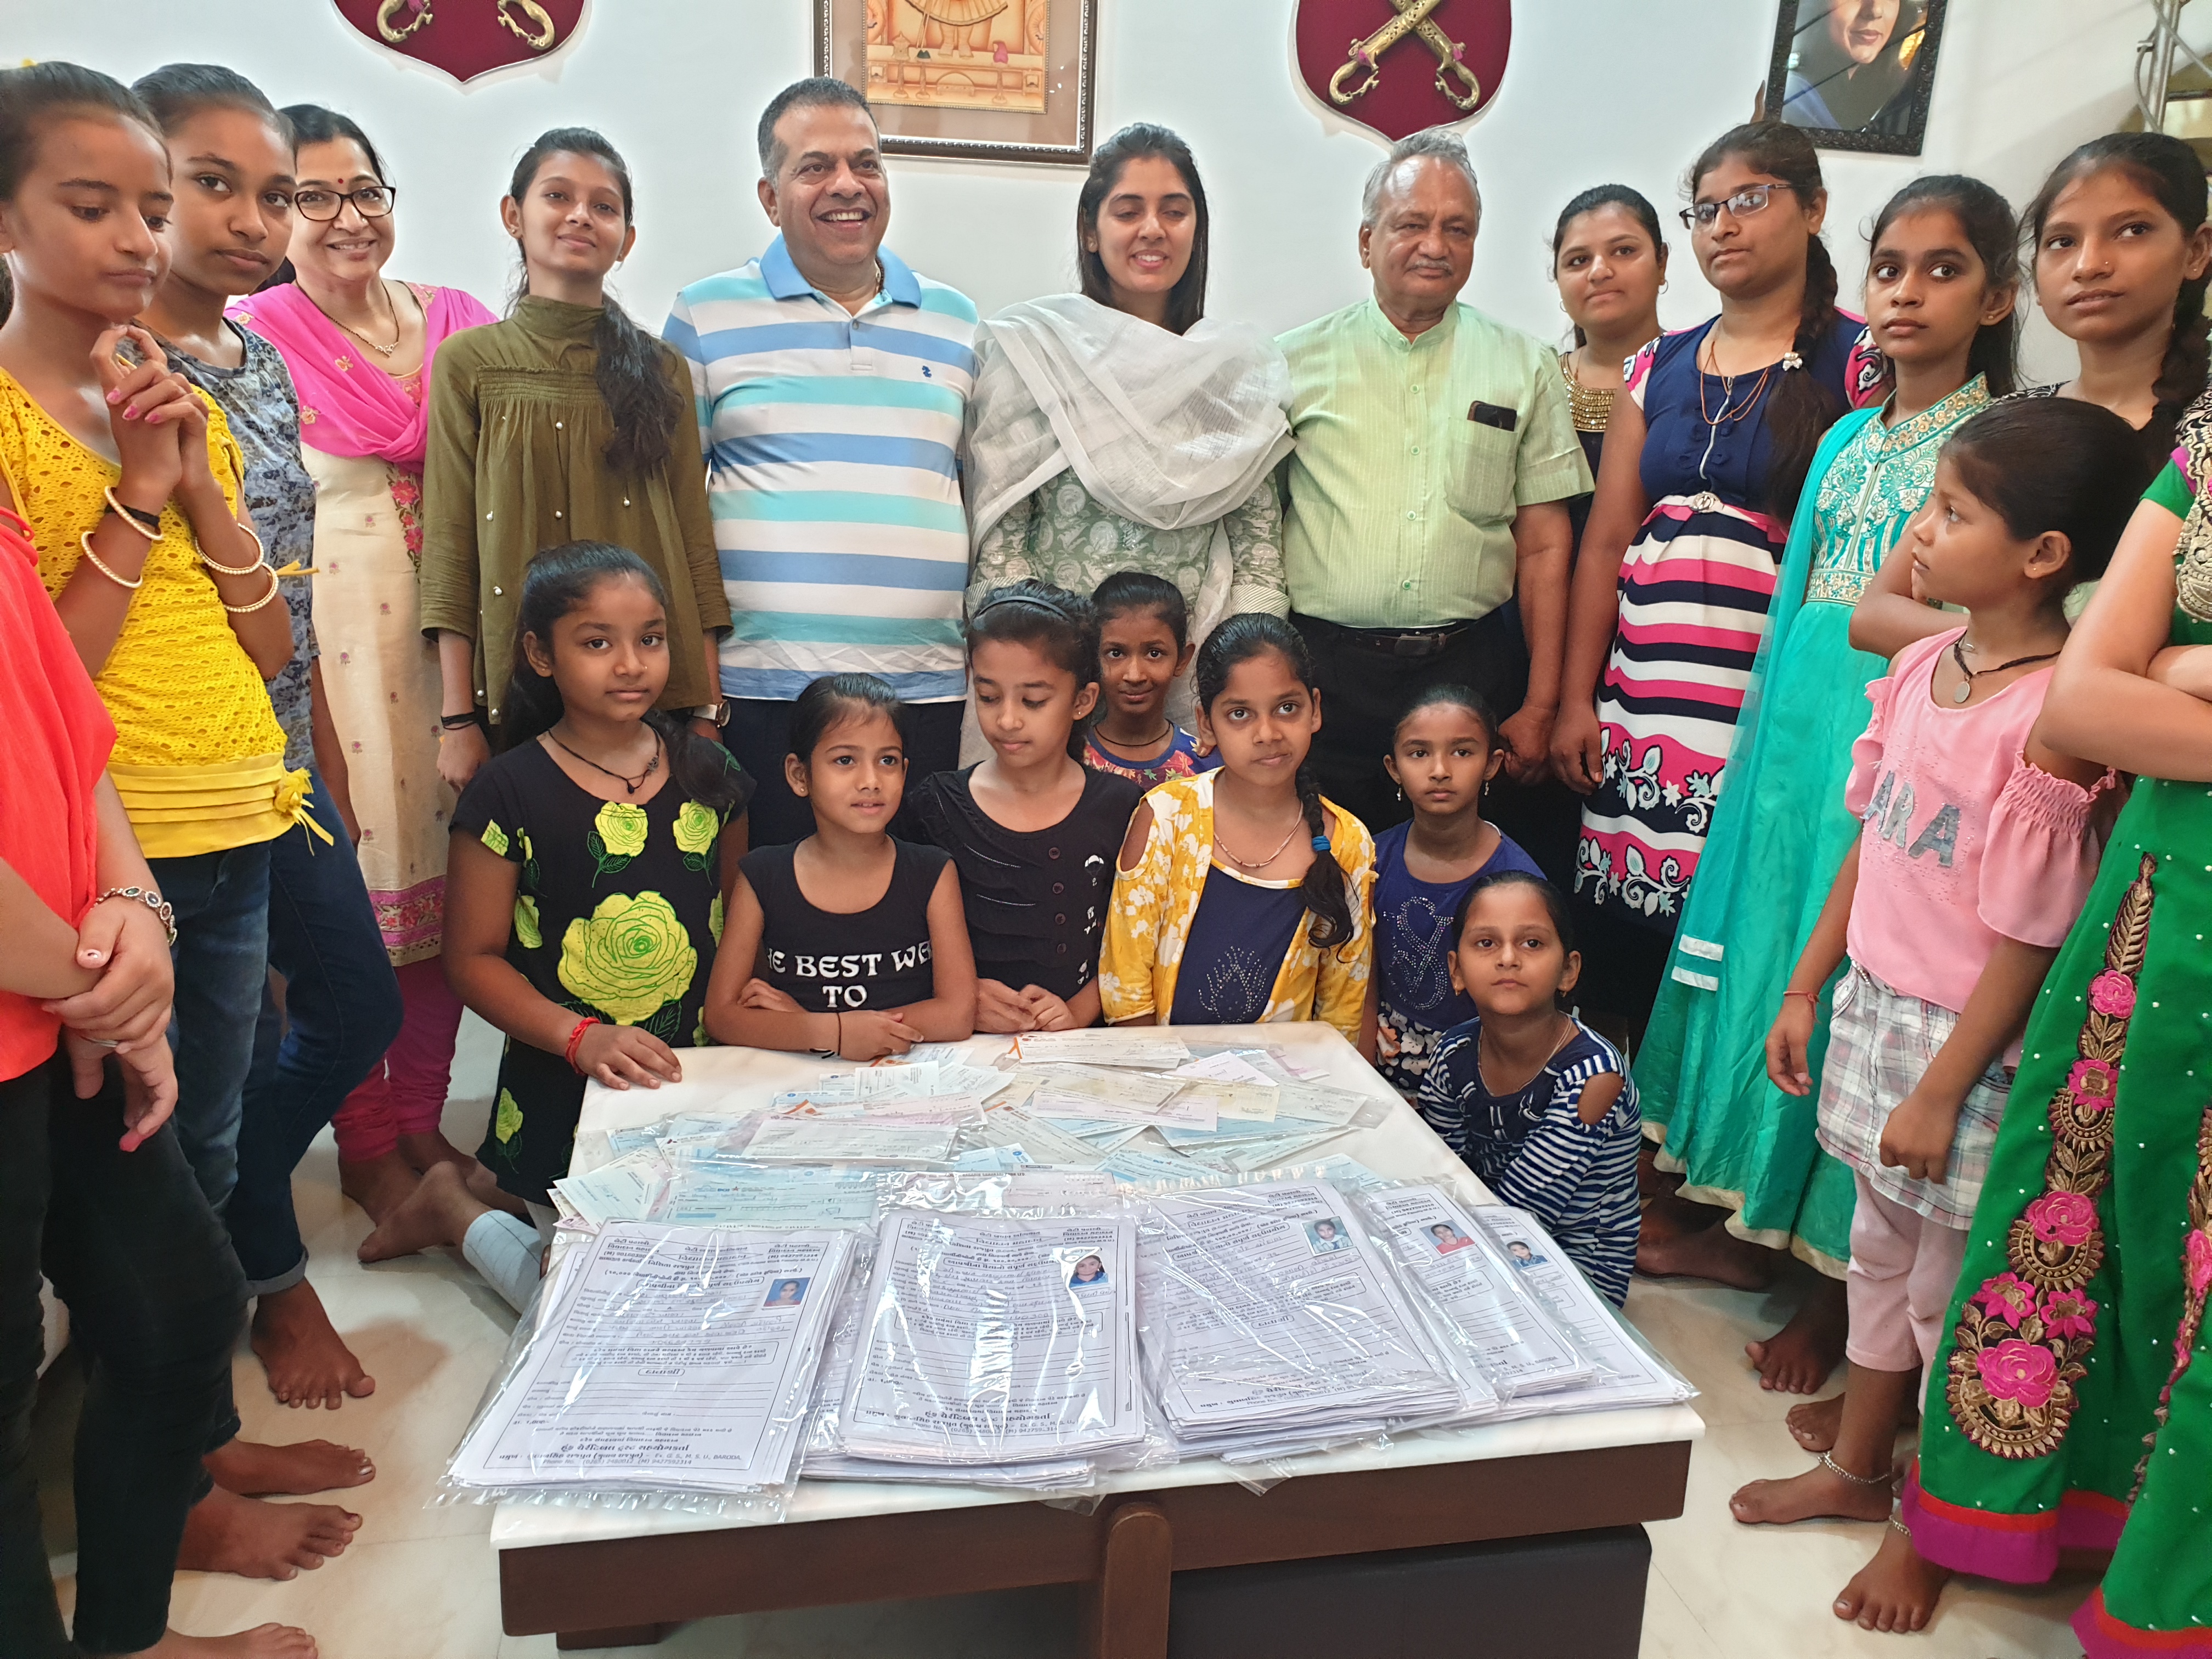 Social worker Nishita Rajput to pay 1 crore fees to support girls education in Vadodara